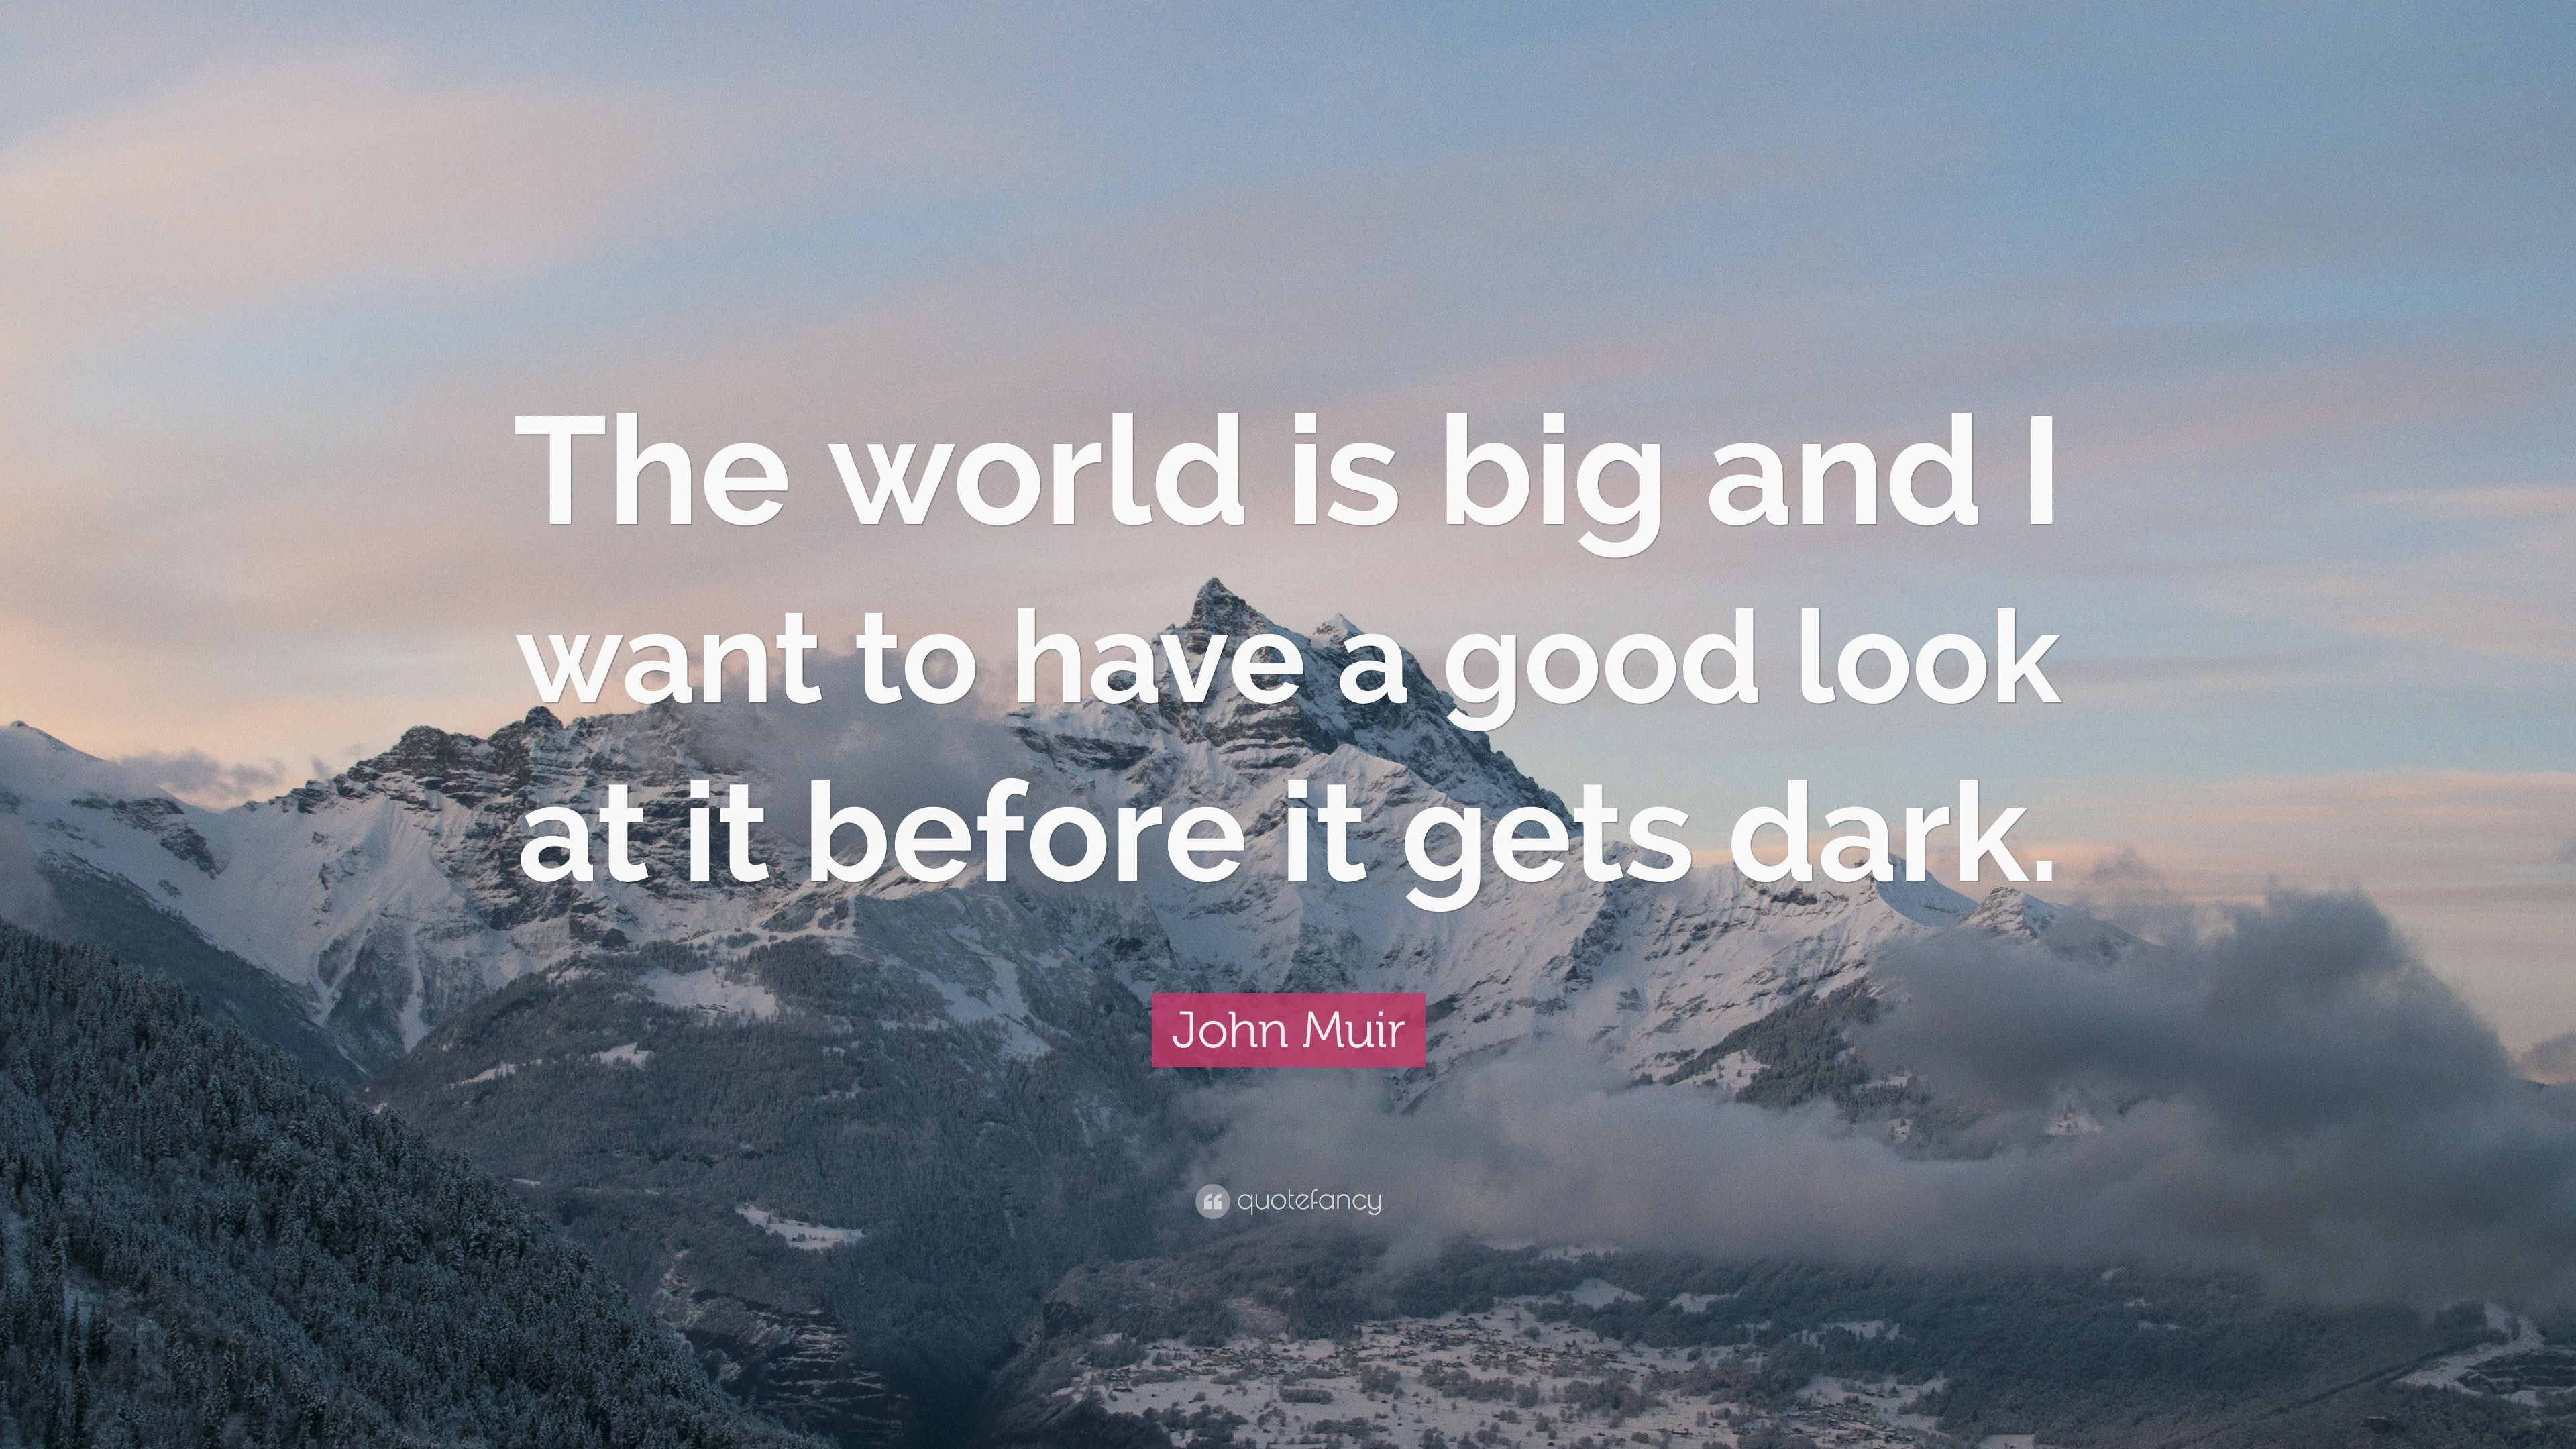 John Muir Quote: “The world is big and I want to have a good look at it